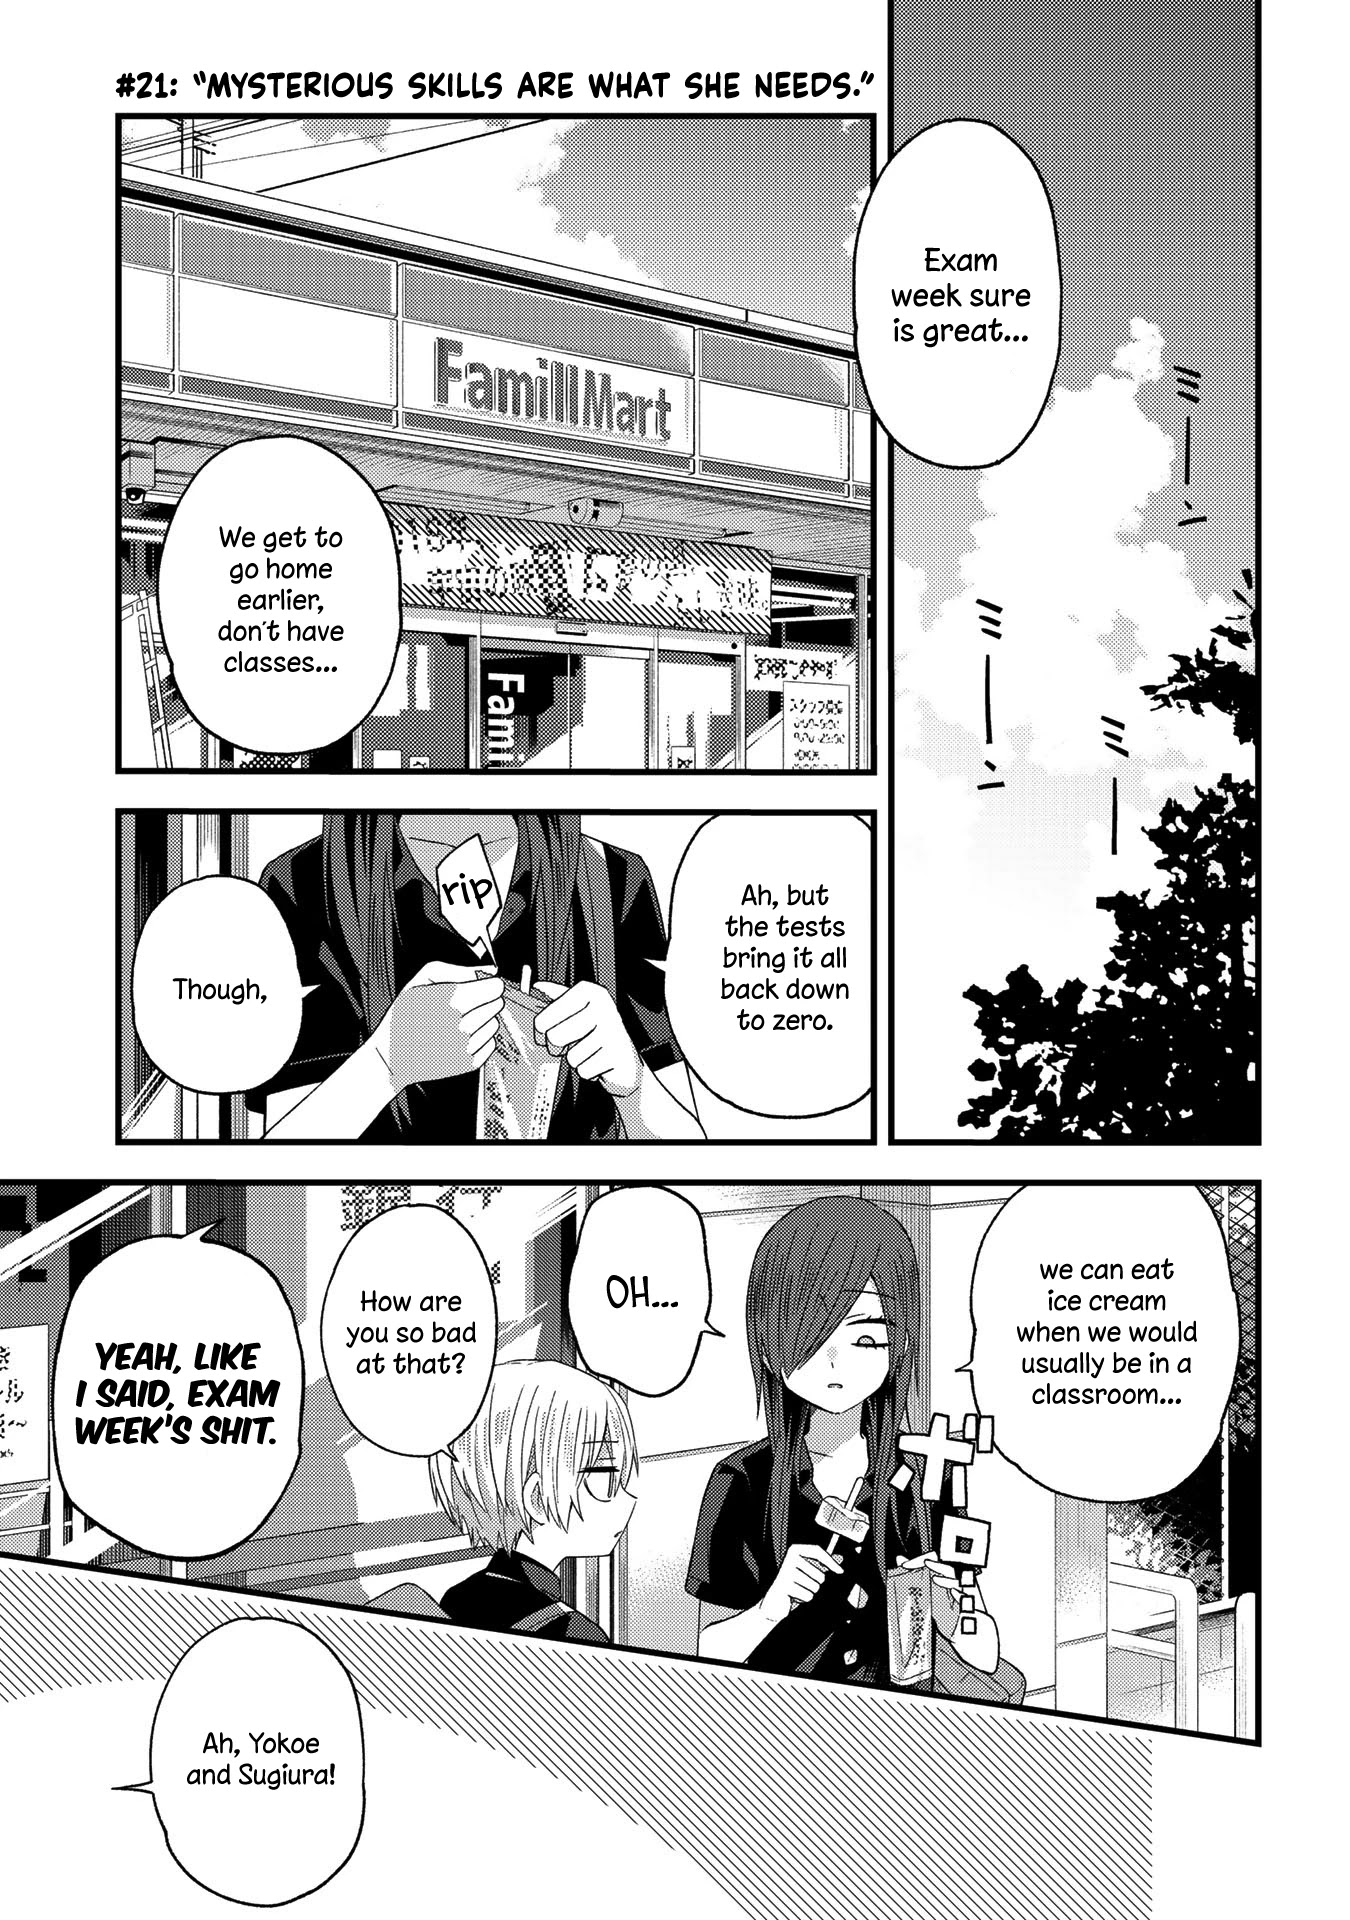 School Zone (Ningiyau) Chapter 21: Mysterious Skills Are What She Needs. - Picture 1